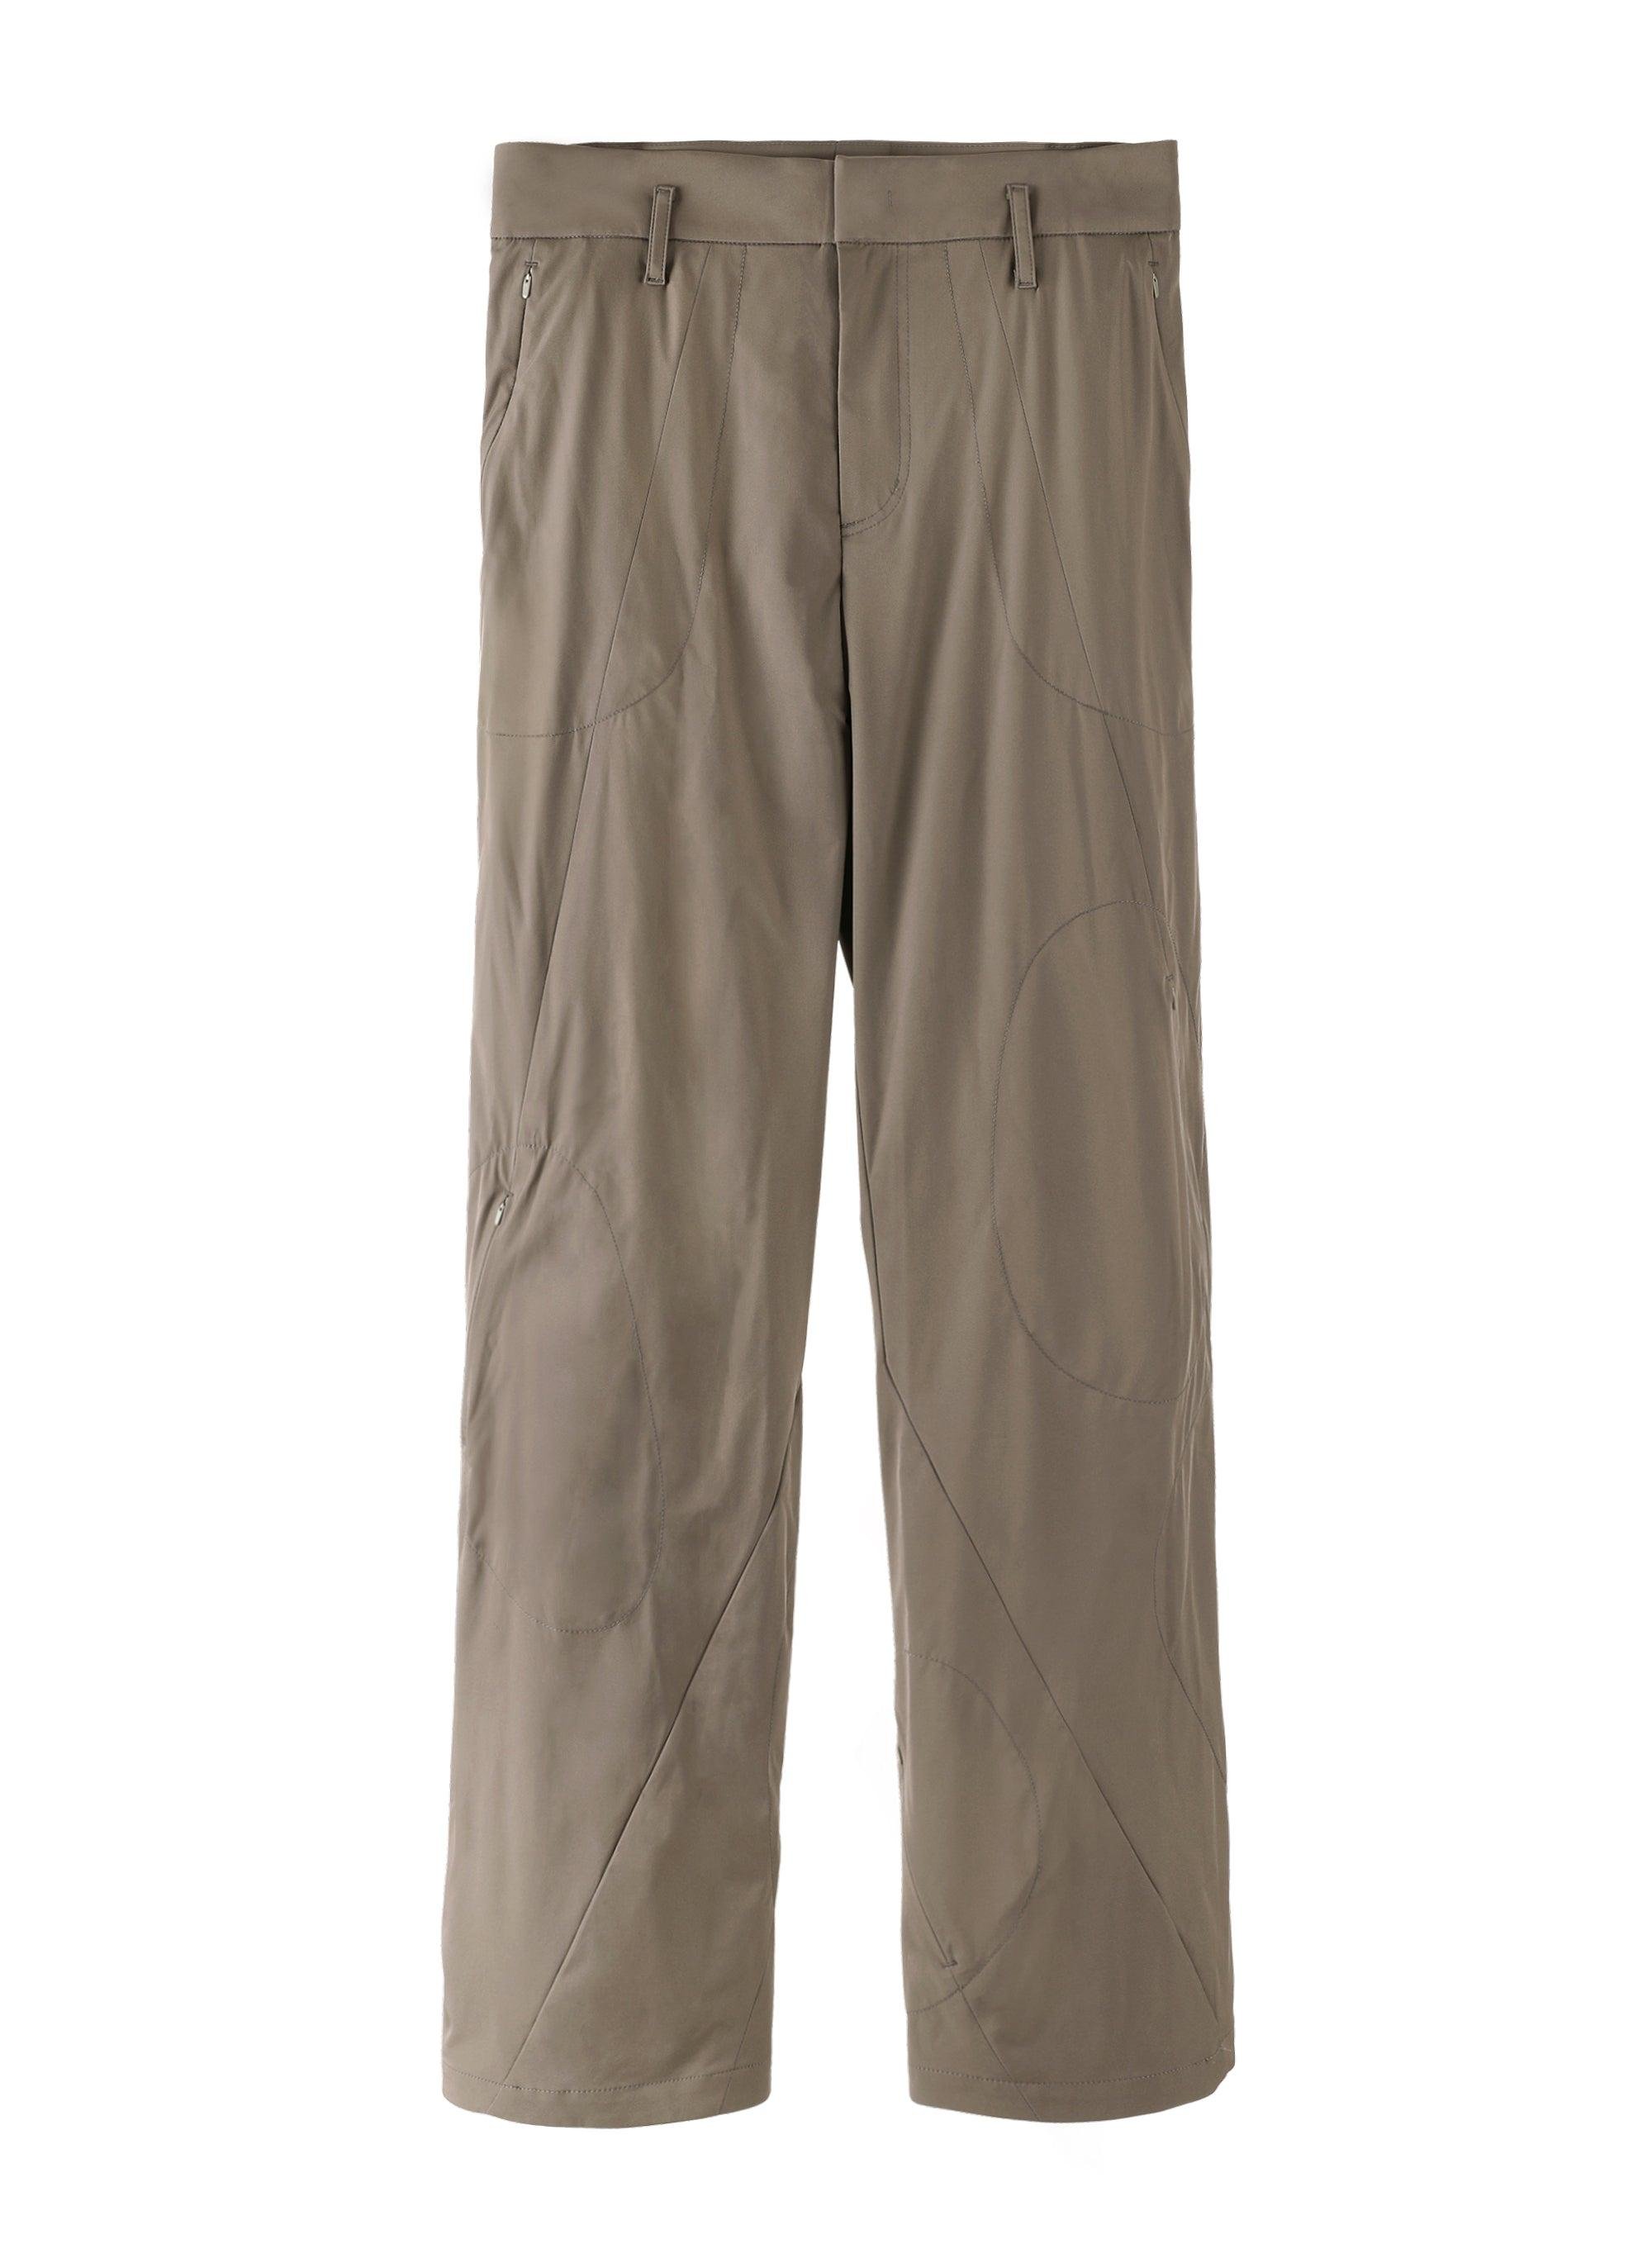 POST ARCHIVE FACTION - 5.1 Trousers Center -  (Olive Green) by POST ARCHIVE FACTION (PAF)